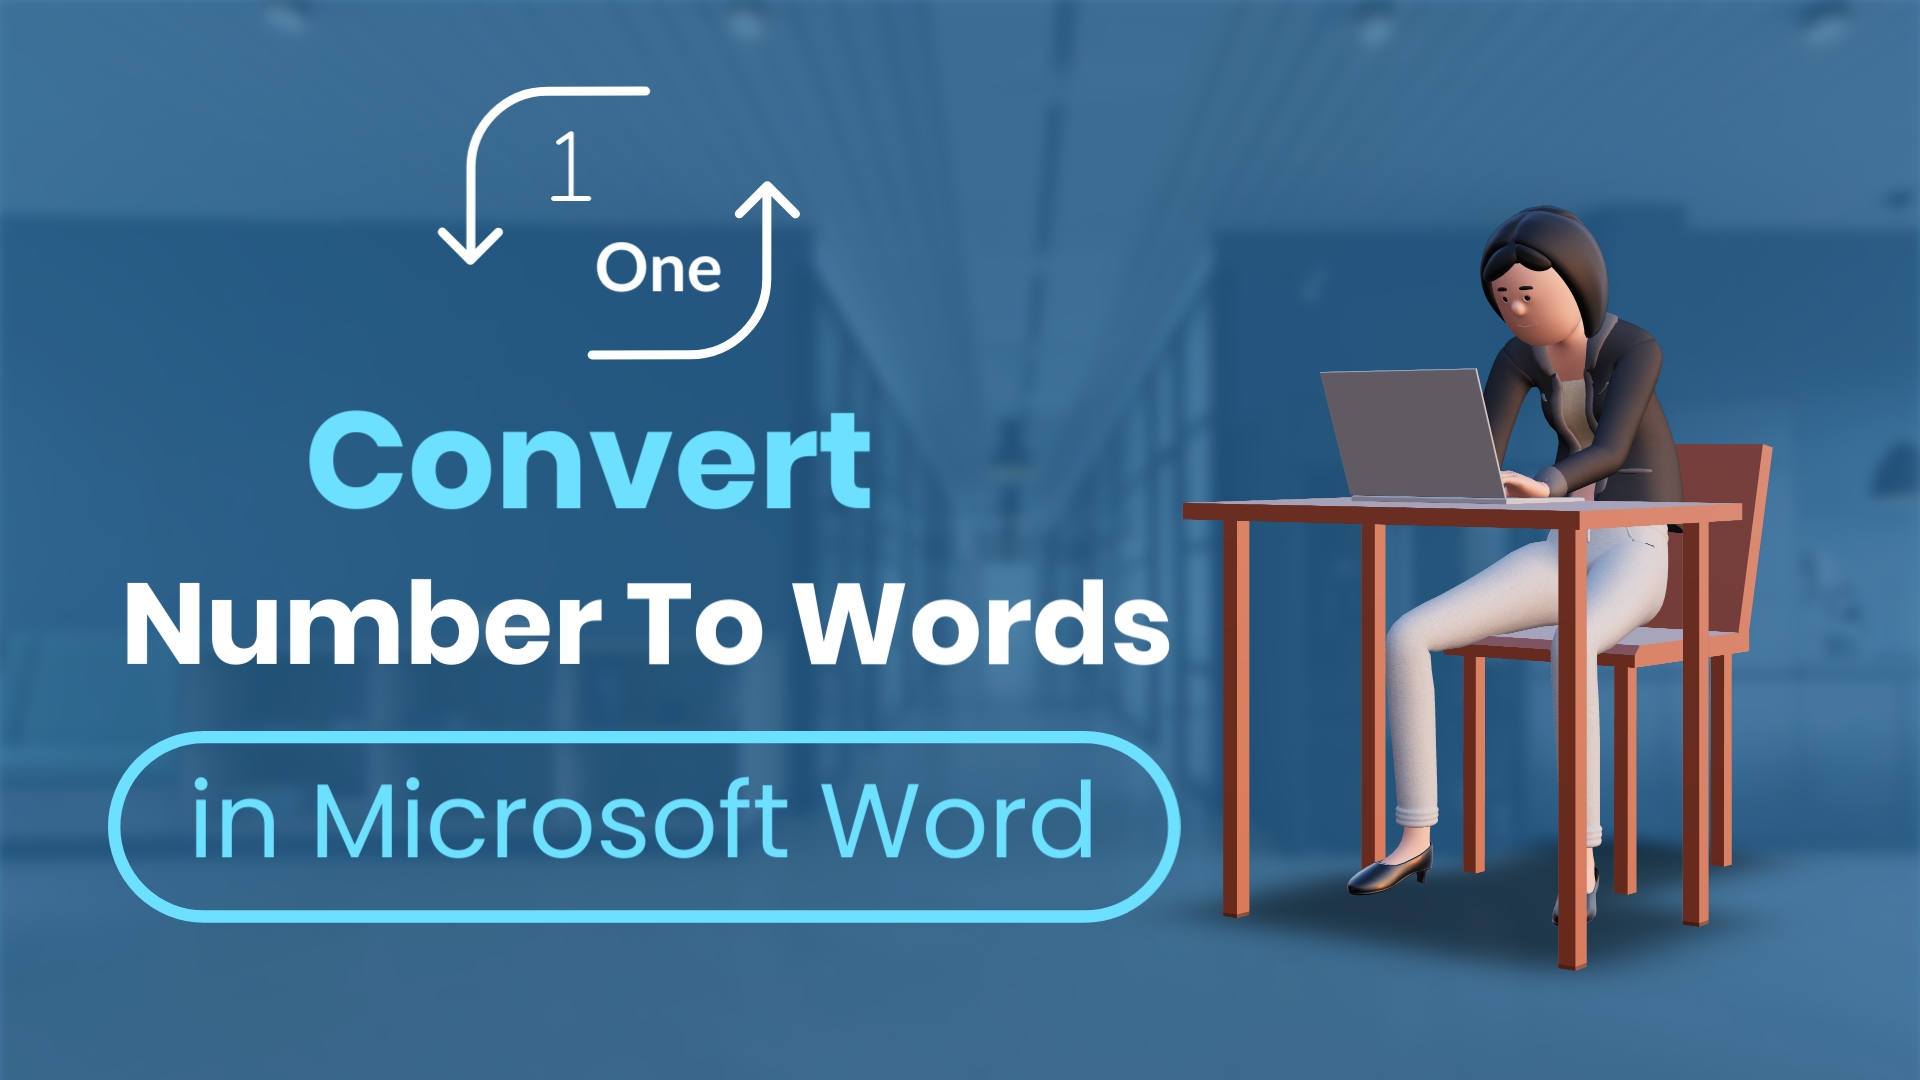 Convert Number-To-Words in Microsoft Word